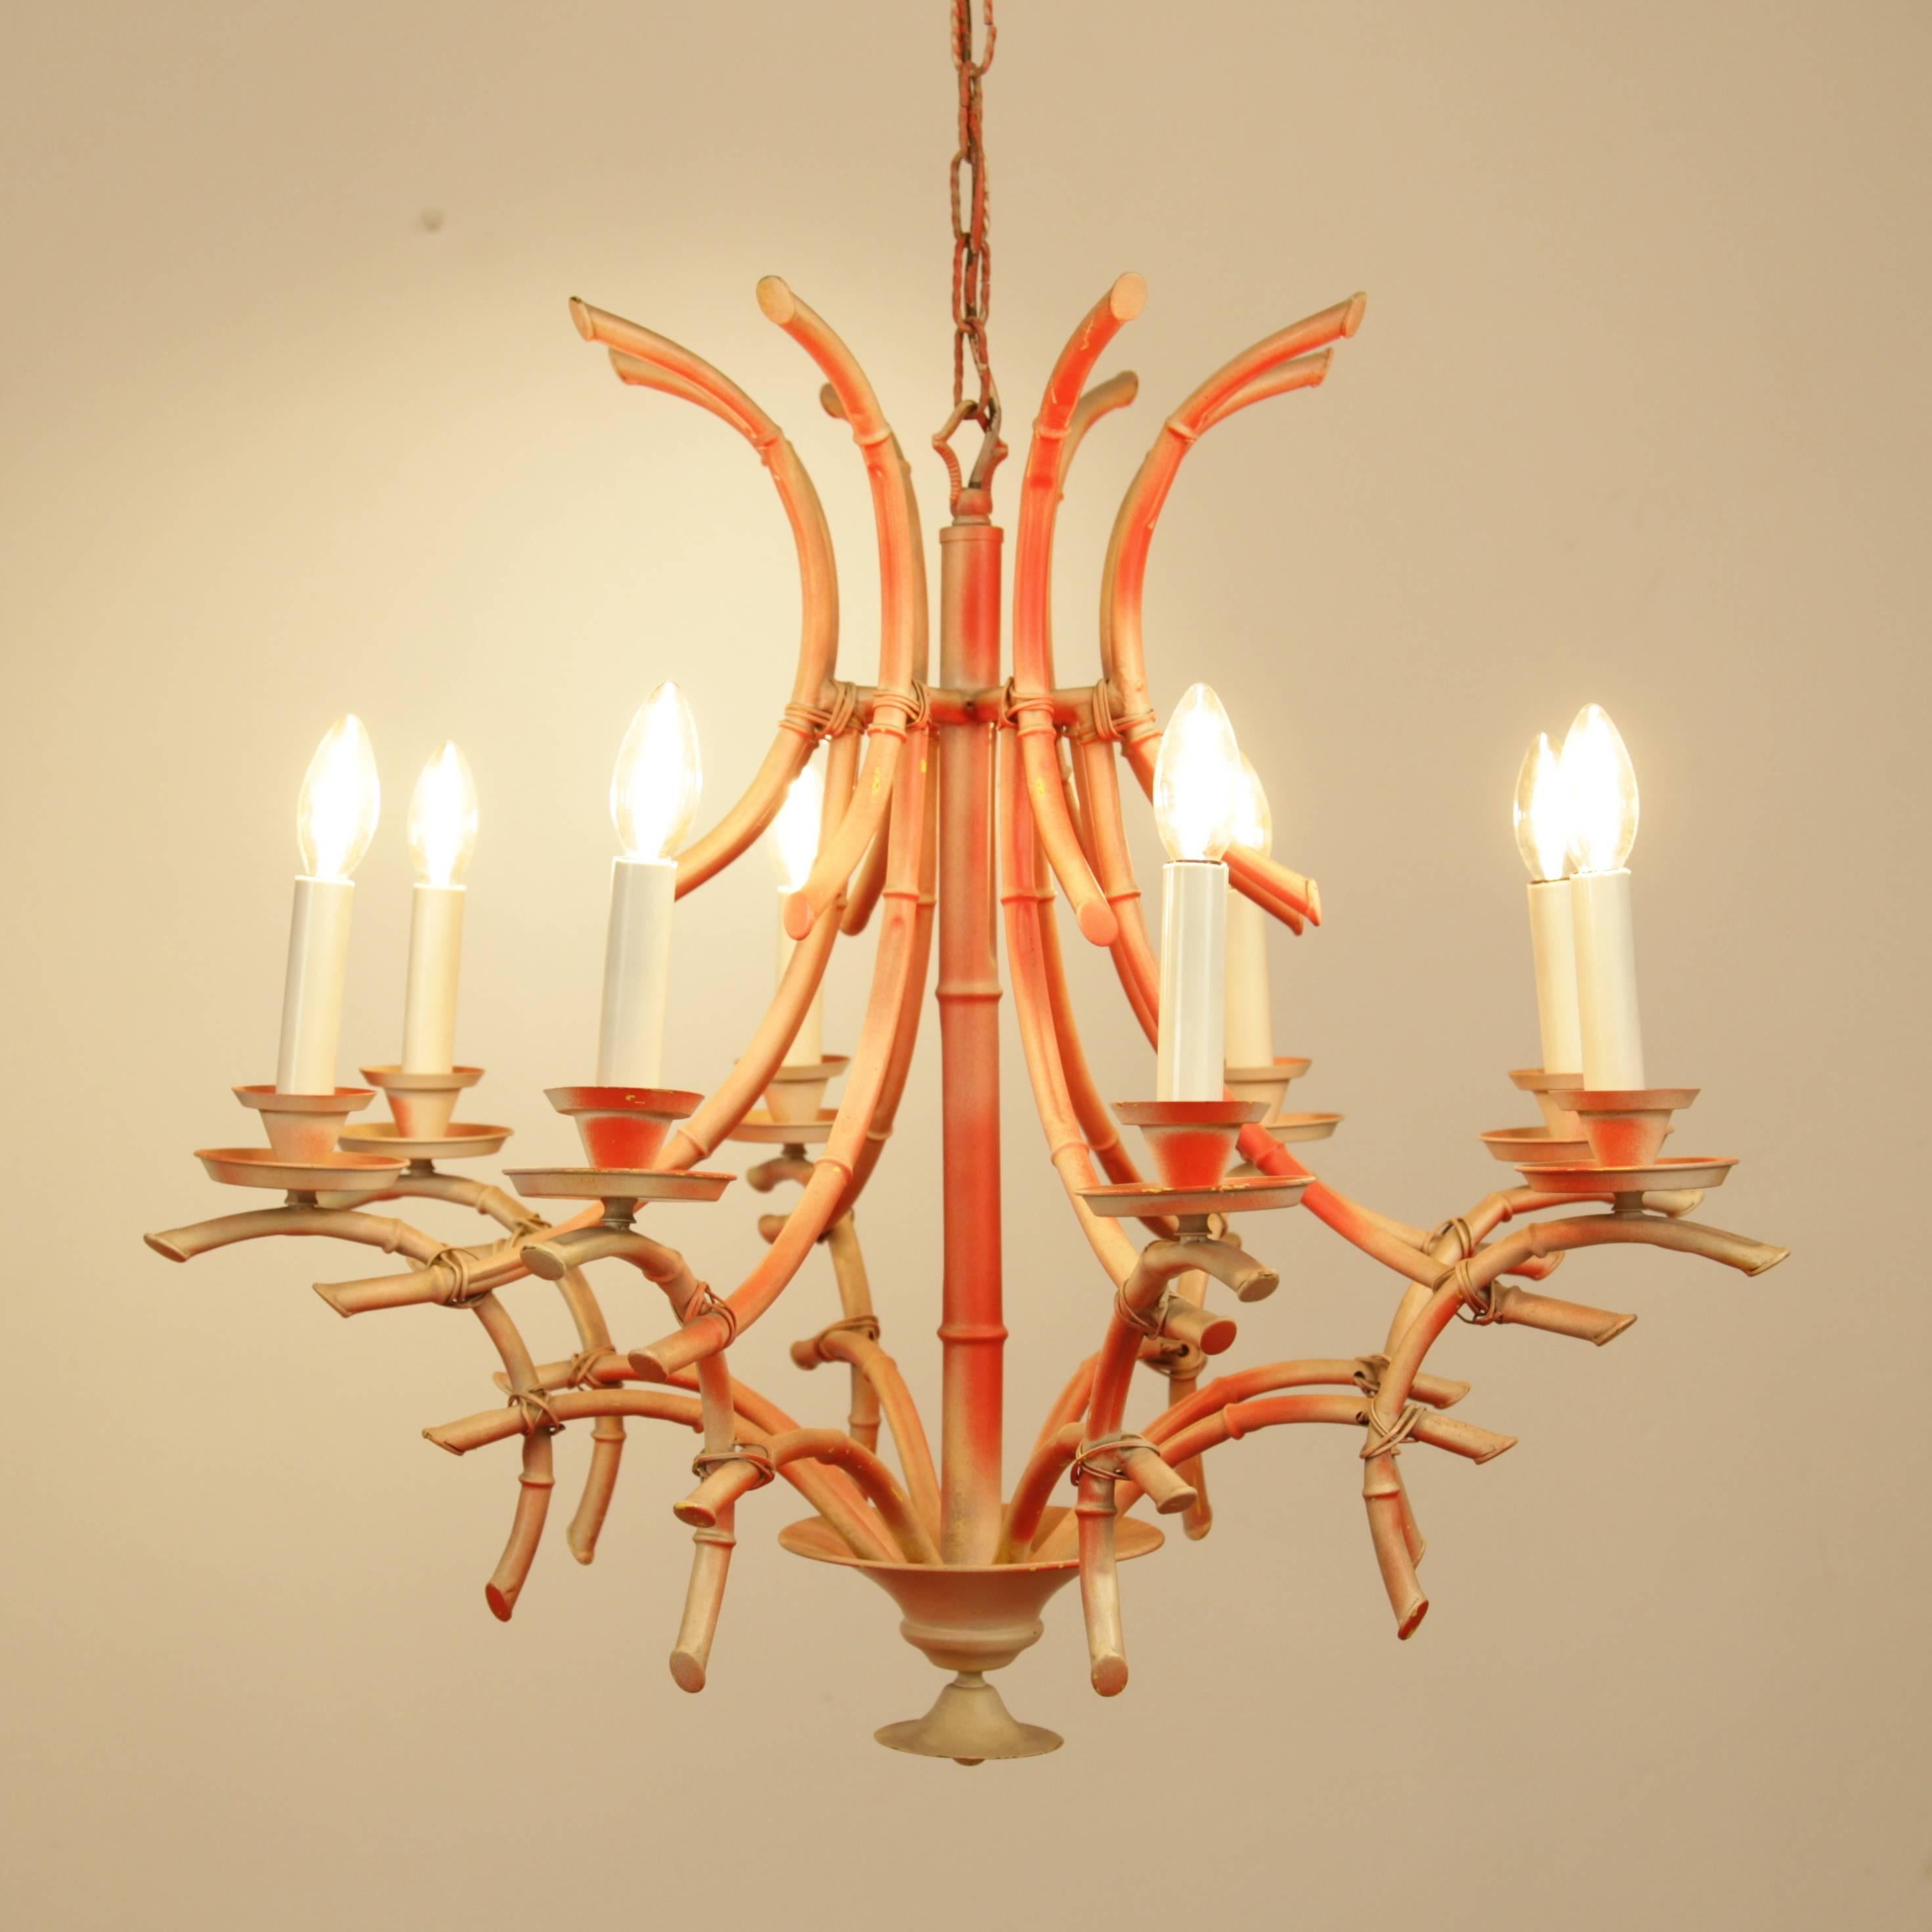 Italian coral painted bamboo chandelier. The chandelier has eight arms and lights and a Classic Chinese Chippendale form.